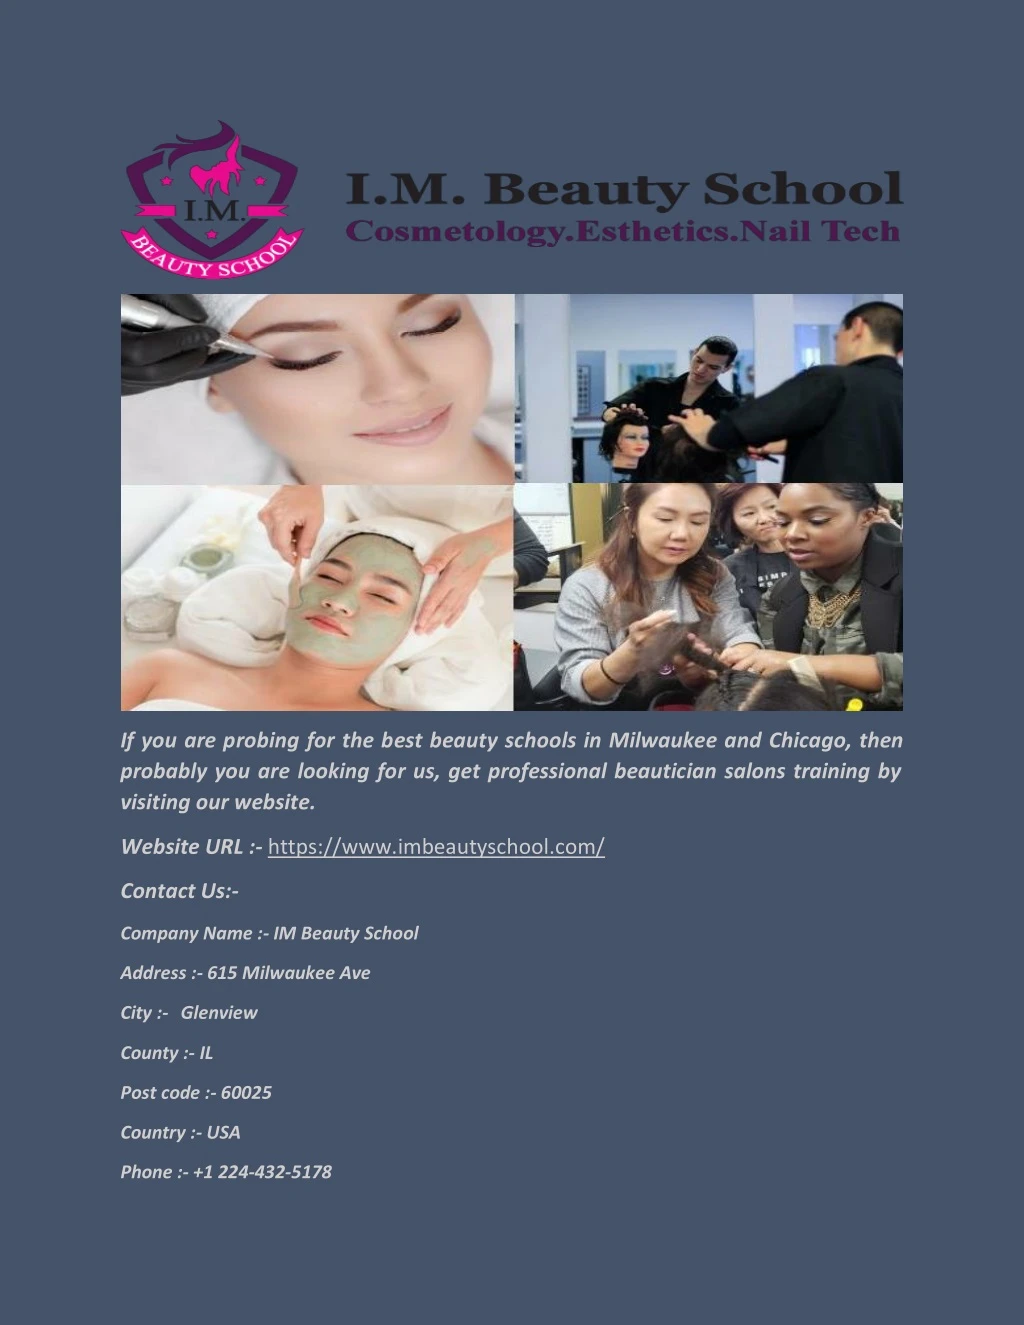 if you are probing for the best beauty schools